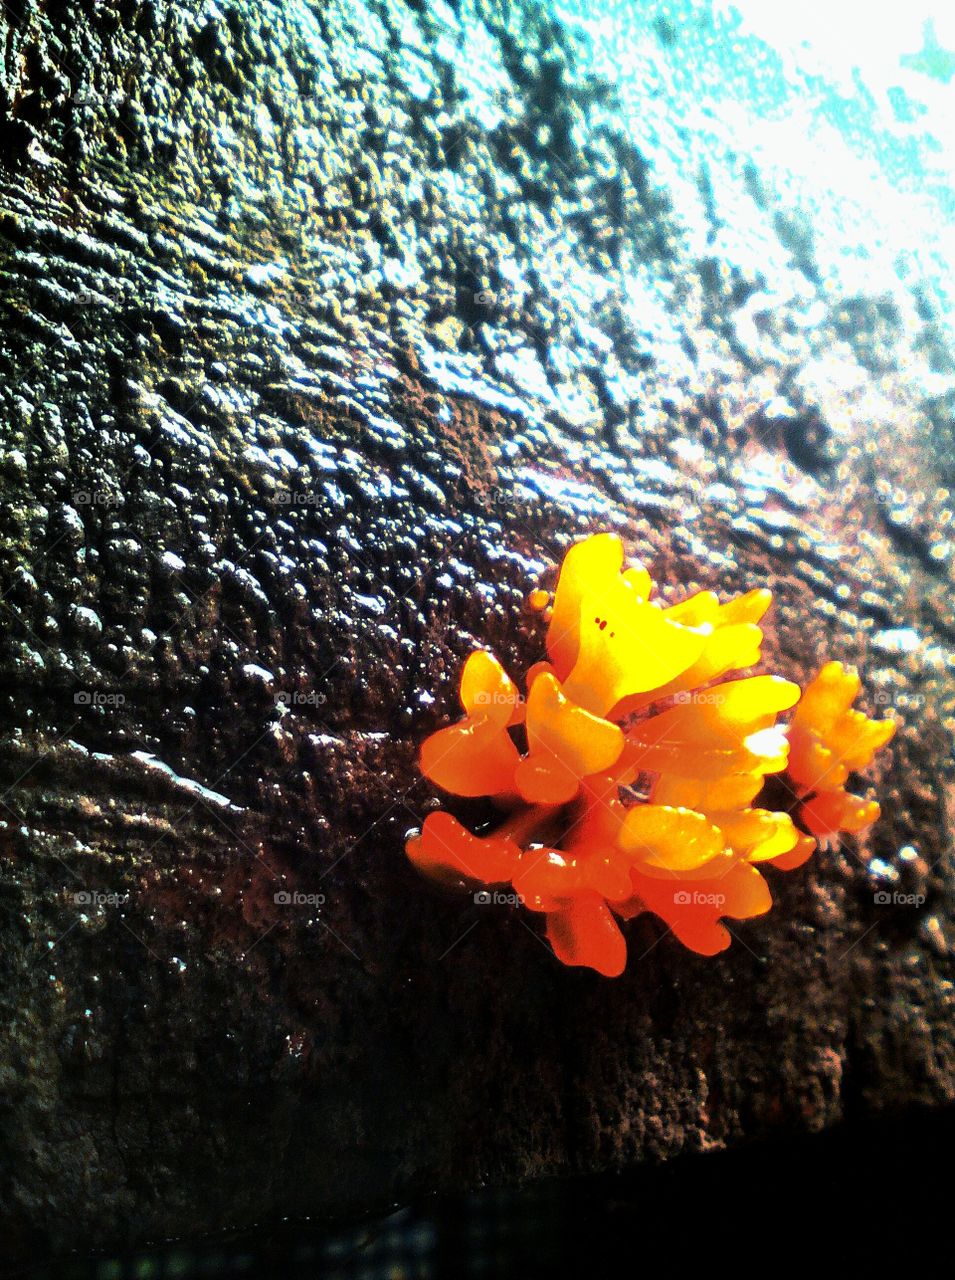 Yellow Fungus on wood, that's rarely half an inch